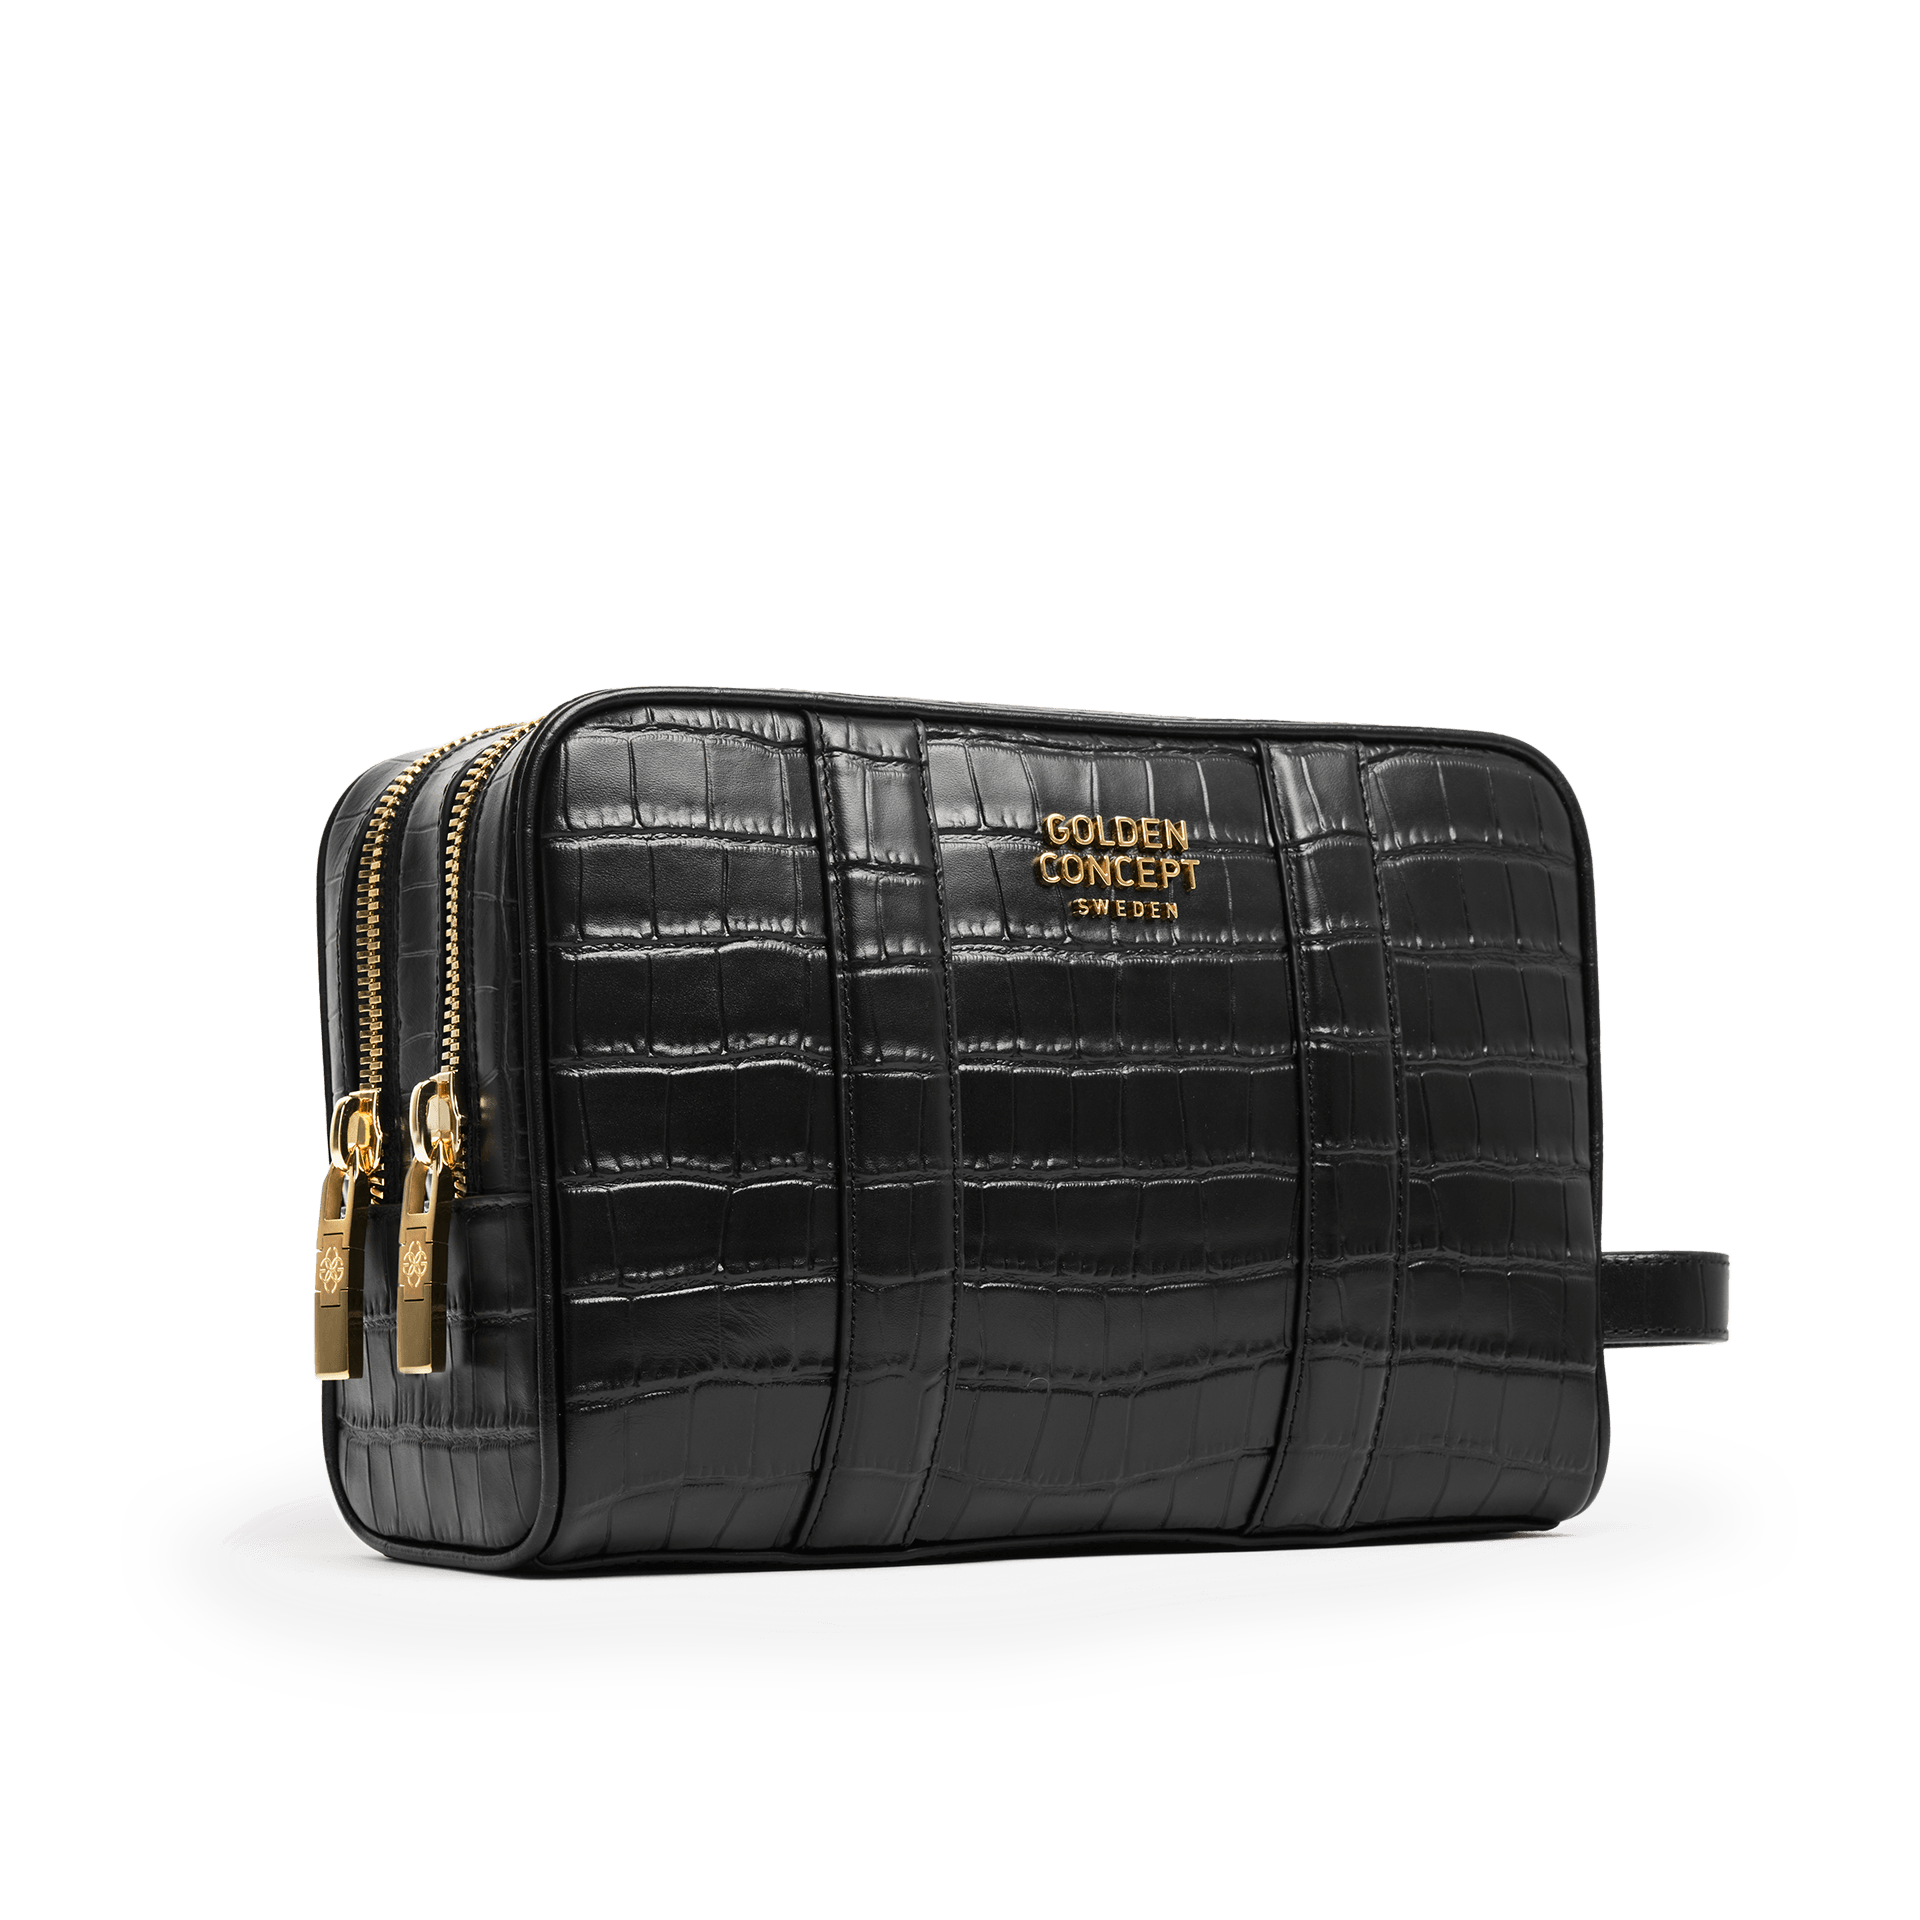 Golden Concept - Leather Accessories - Toiletry Bag - Croco Embossed - Large